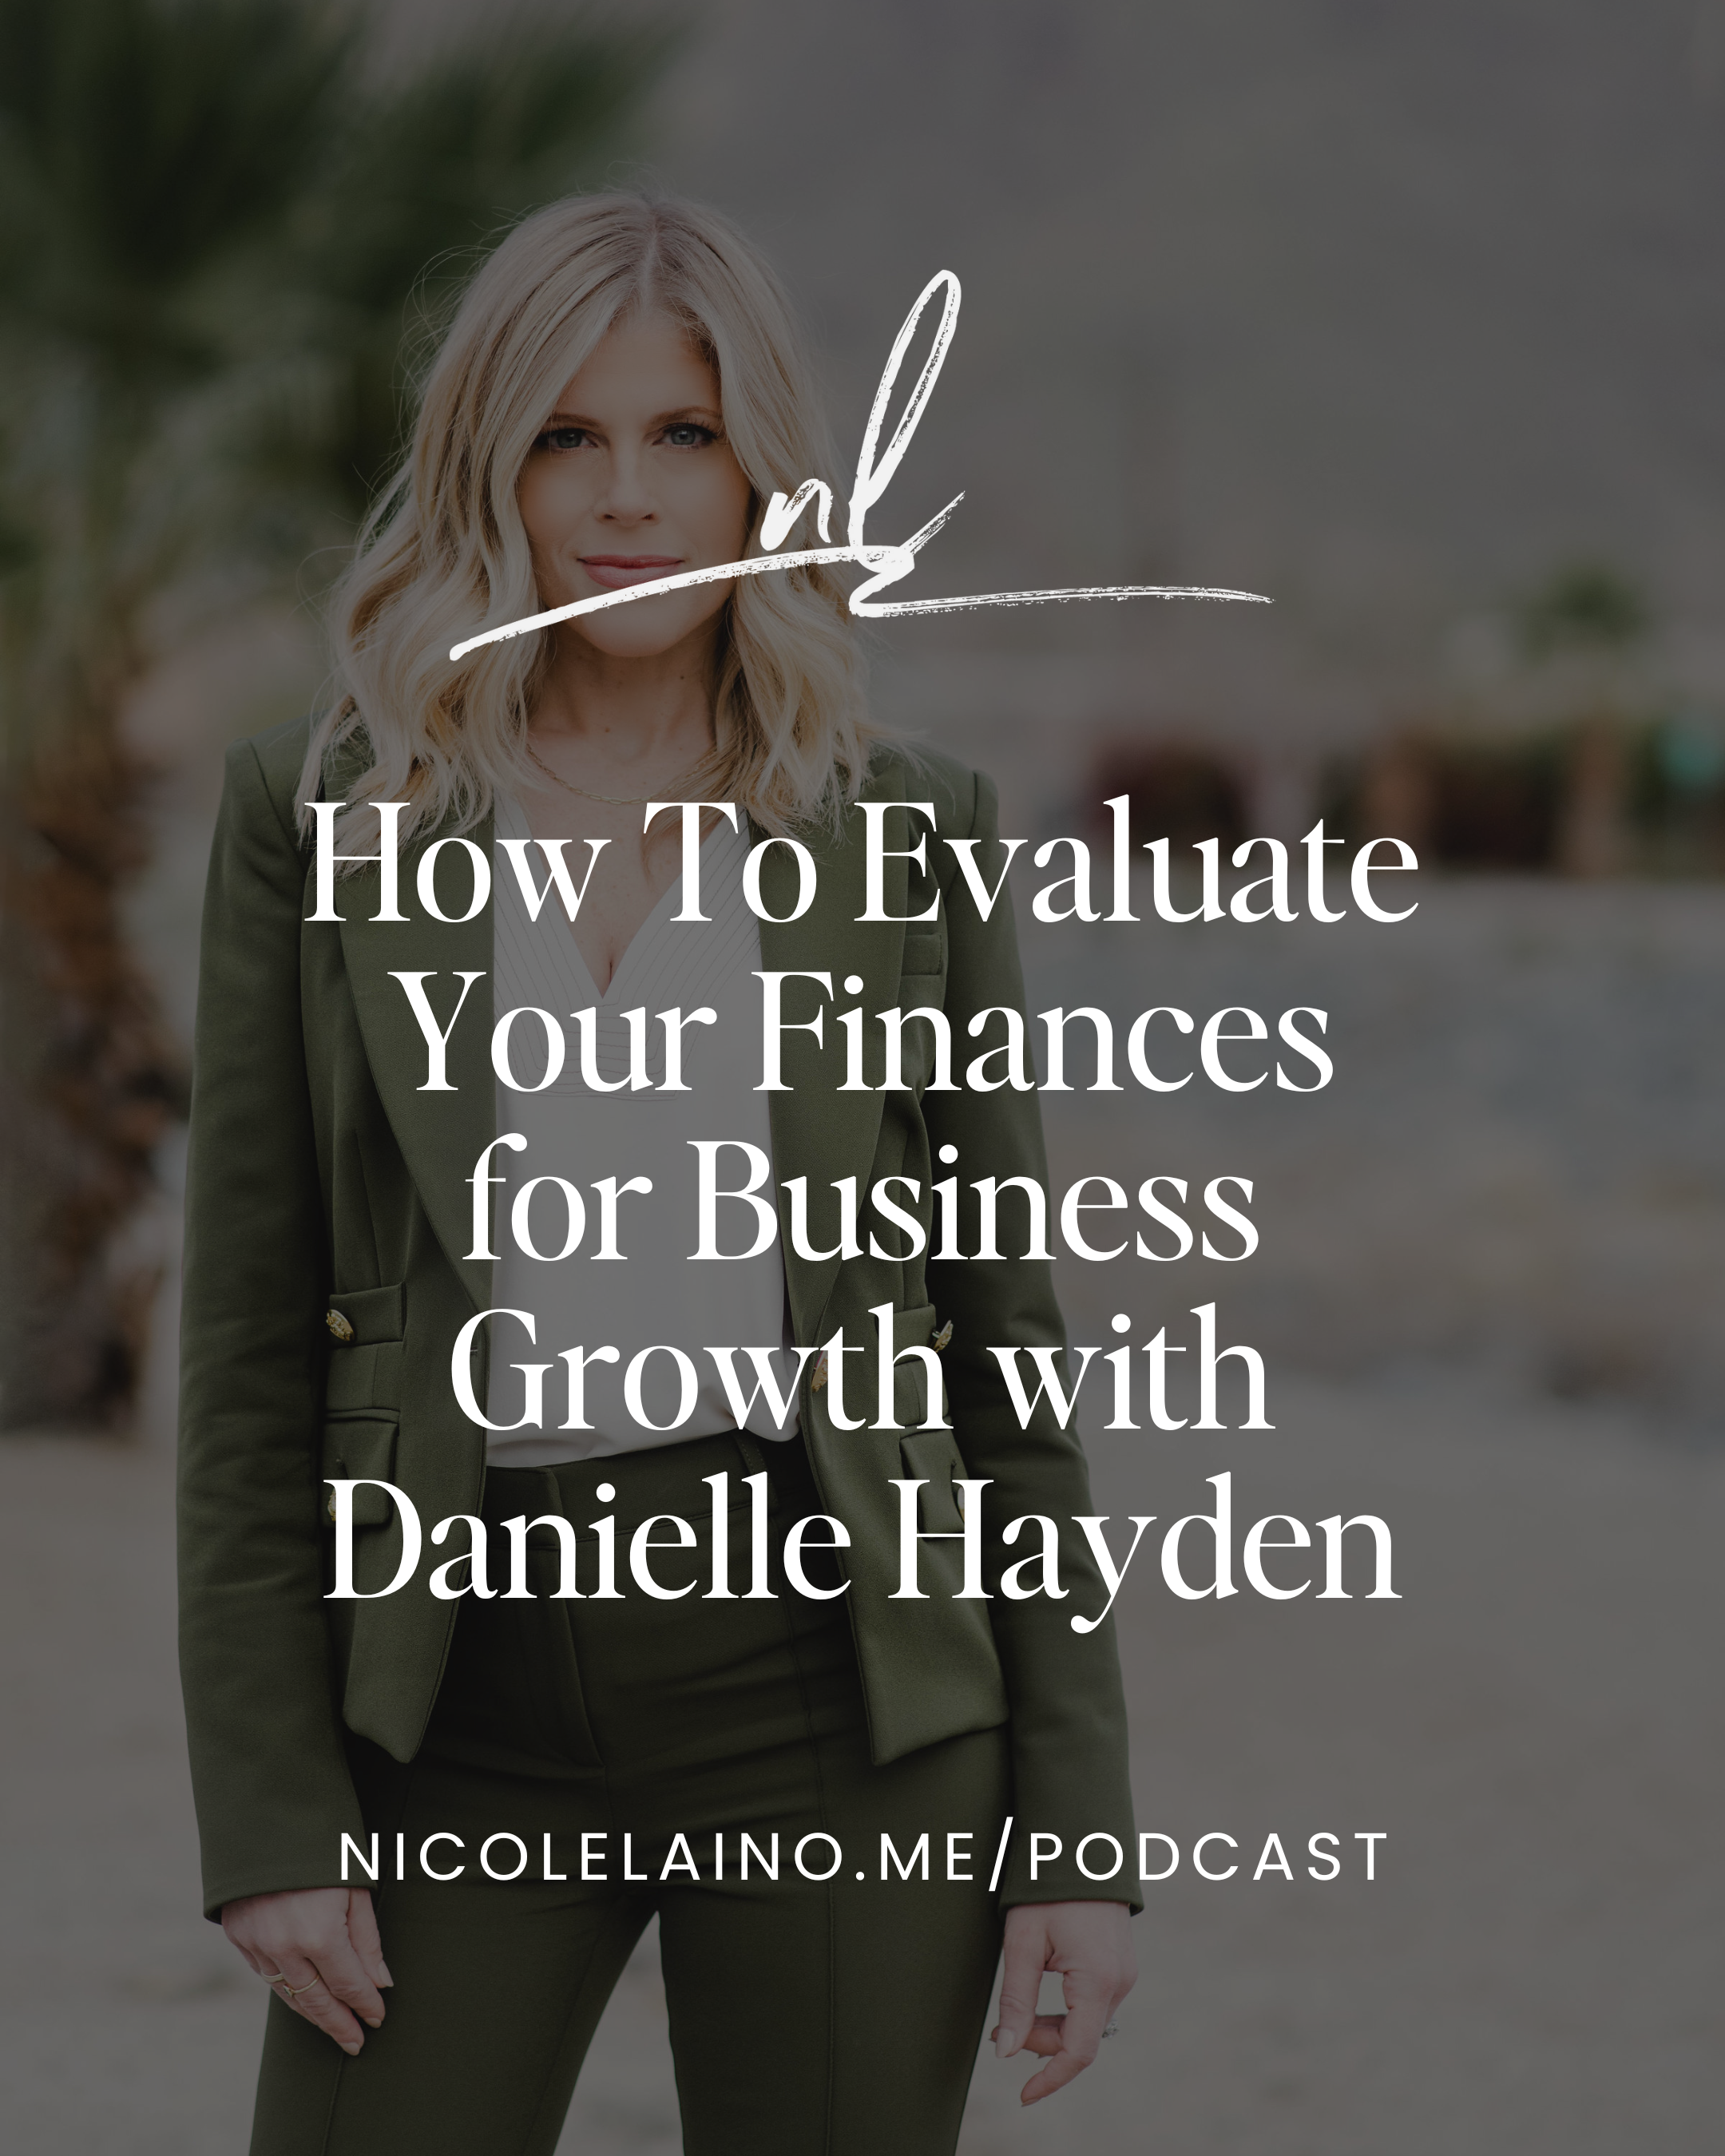 How To Evaluate Your Finances for Business Growth with Danielle Hayden